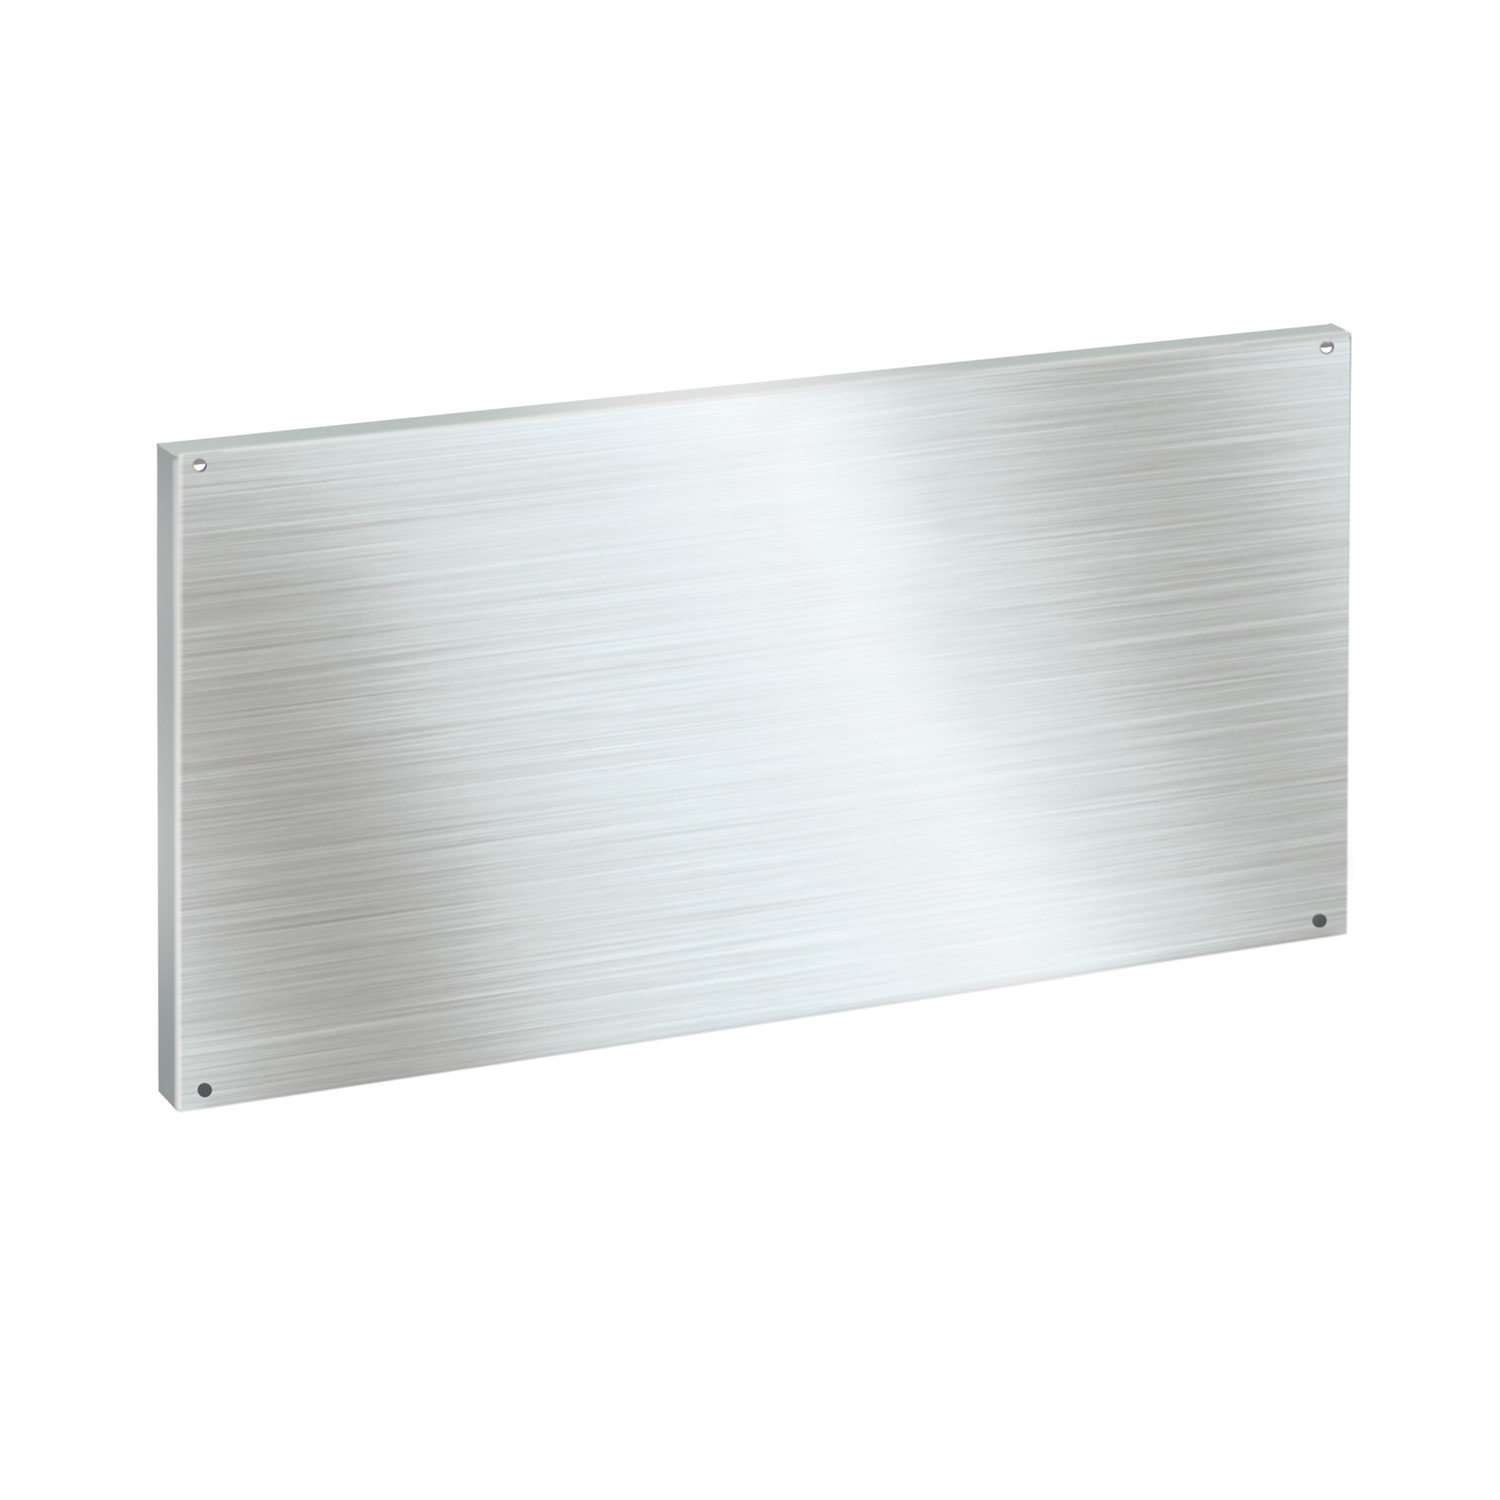 Stainless steel back panel (440 x 900mm)